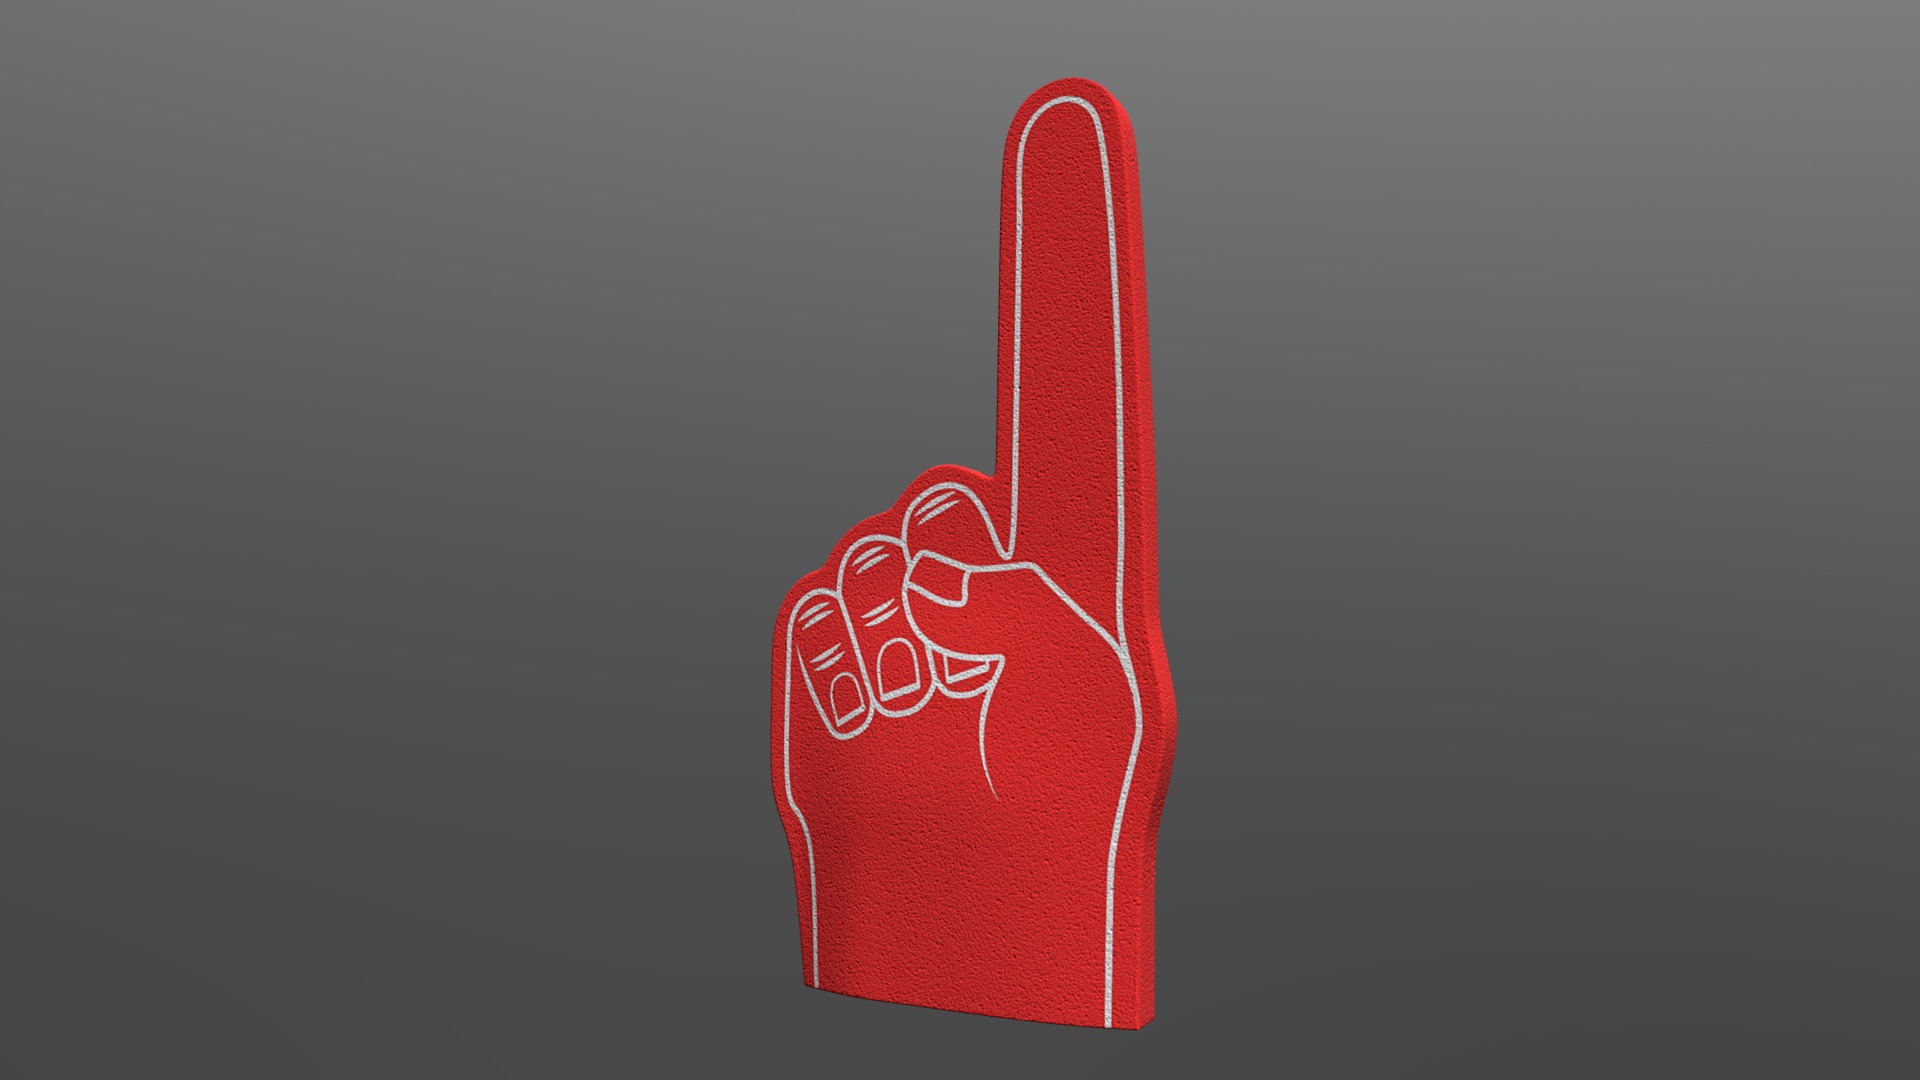 Sample Fan Foam Finger

Tip: If desired, the quantity of polygons can be reduced

Zip contains:

1 .max (low poly and high poly 3dsMax 2016)

1 .mat  (Vray Materials)

1 .blend (low poly with Subsurf.mod, with UV and Materials)

1 .fbx (high poly, smoothed)

1 .fbx (low poly, not smoothed)

1 .obj (high poly, smoothed)

1 .obj (low poly, not smoothed)

High resolution textures(4096x4096 (.PNG)): Base Color, Ambient Occlusion, Height map, Normal map, Metallic, Roughness

Vray Textures Pack(.PNG)

PBR Textures Pack(.PNG)

The author hopes to your creativity.

If you have questions or suggestions, please contact me

P.S. This model was created in software &lsquo;Blender 3D' with GNU General Public License (GPL, or free software) - Sample Fan Foam Finger - 3D model by Vitamin (@btrseller) 3d model